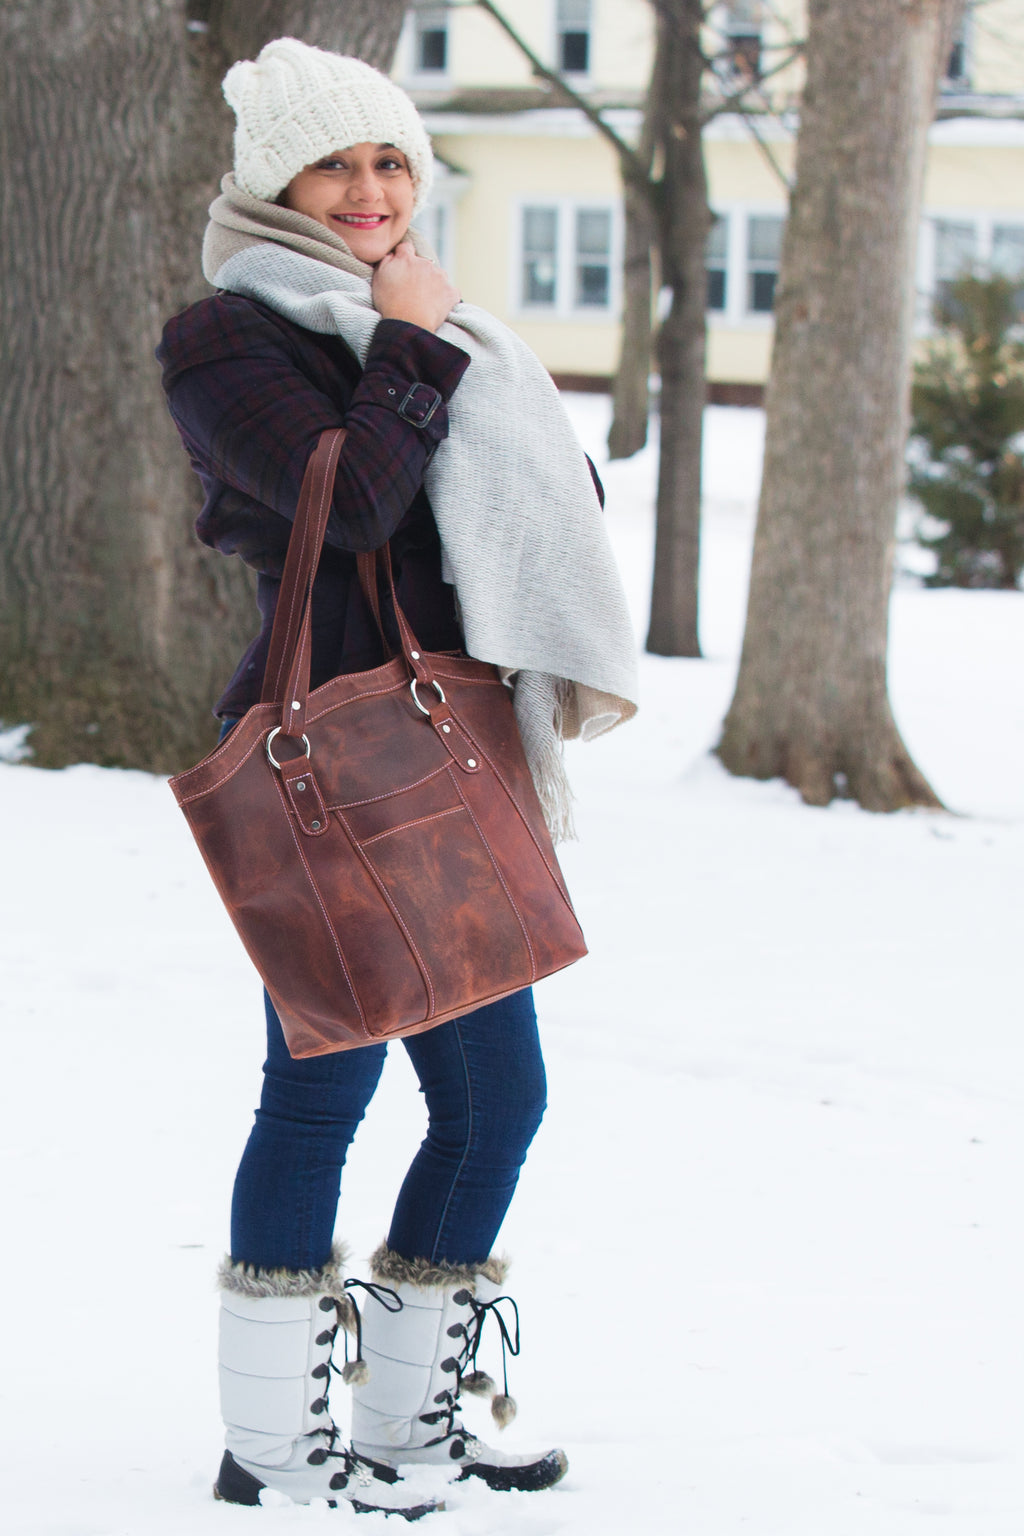 From Office to On-The-Go: The Versatile Women's Laptop Tote Bag You Need